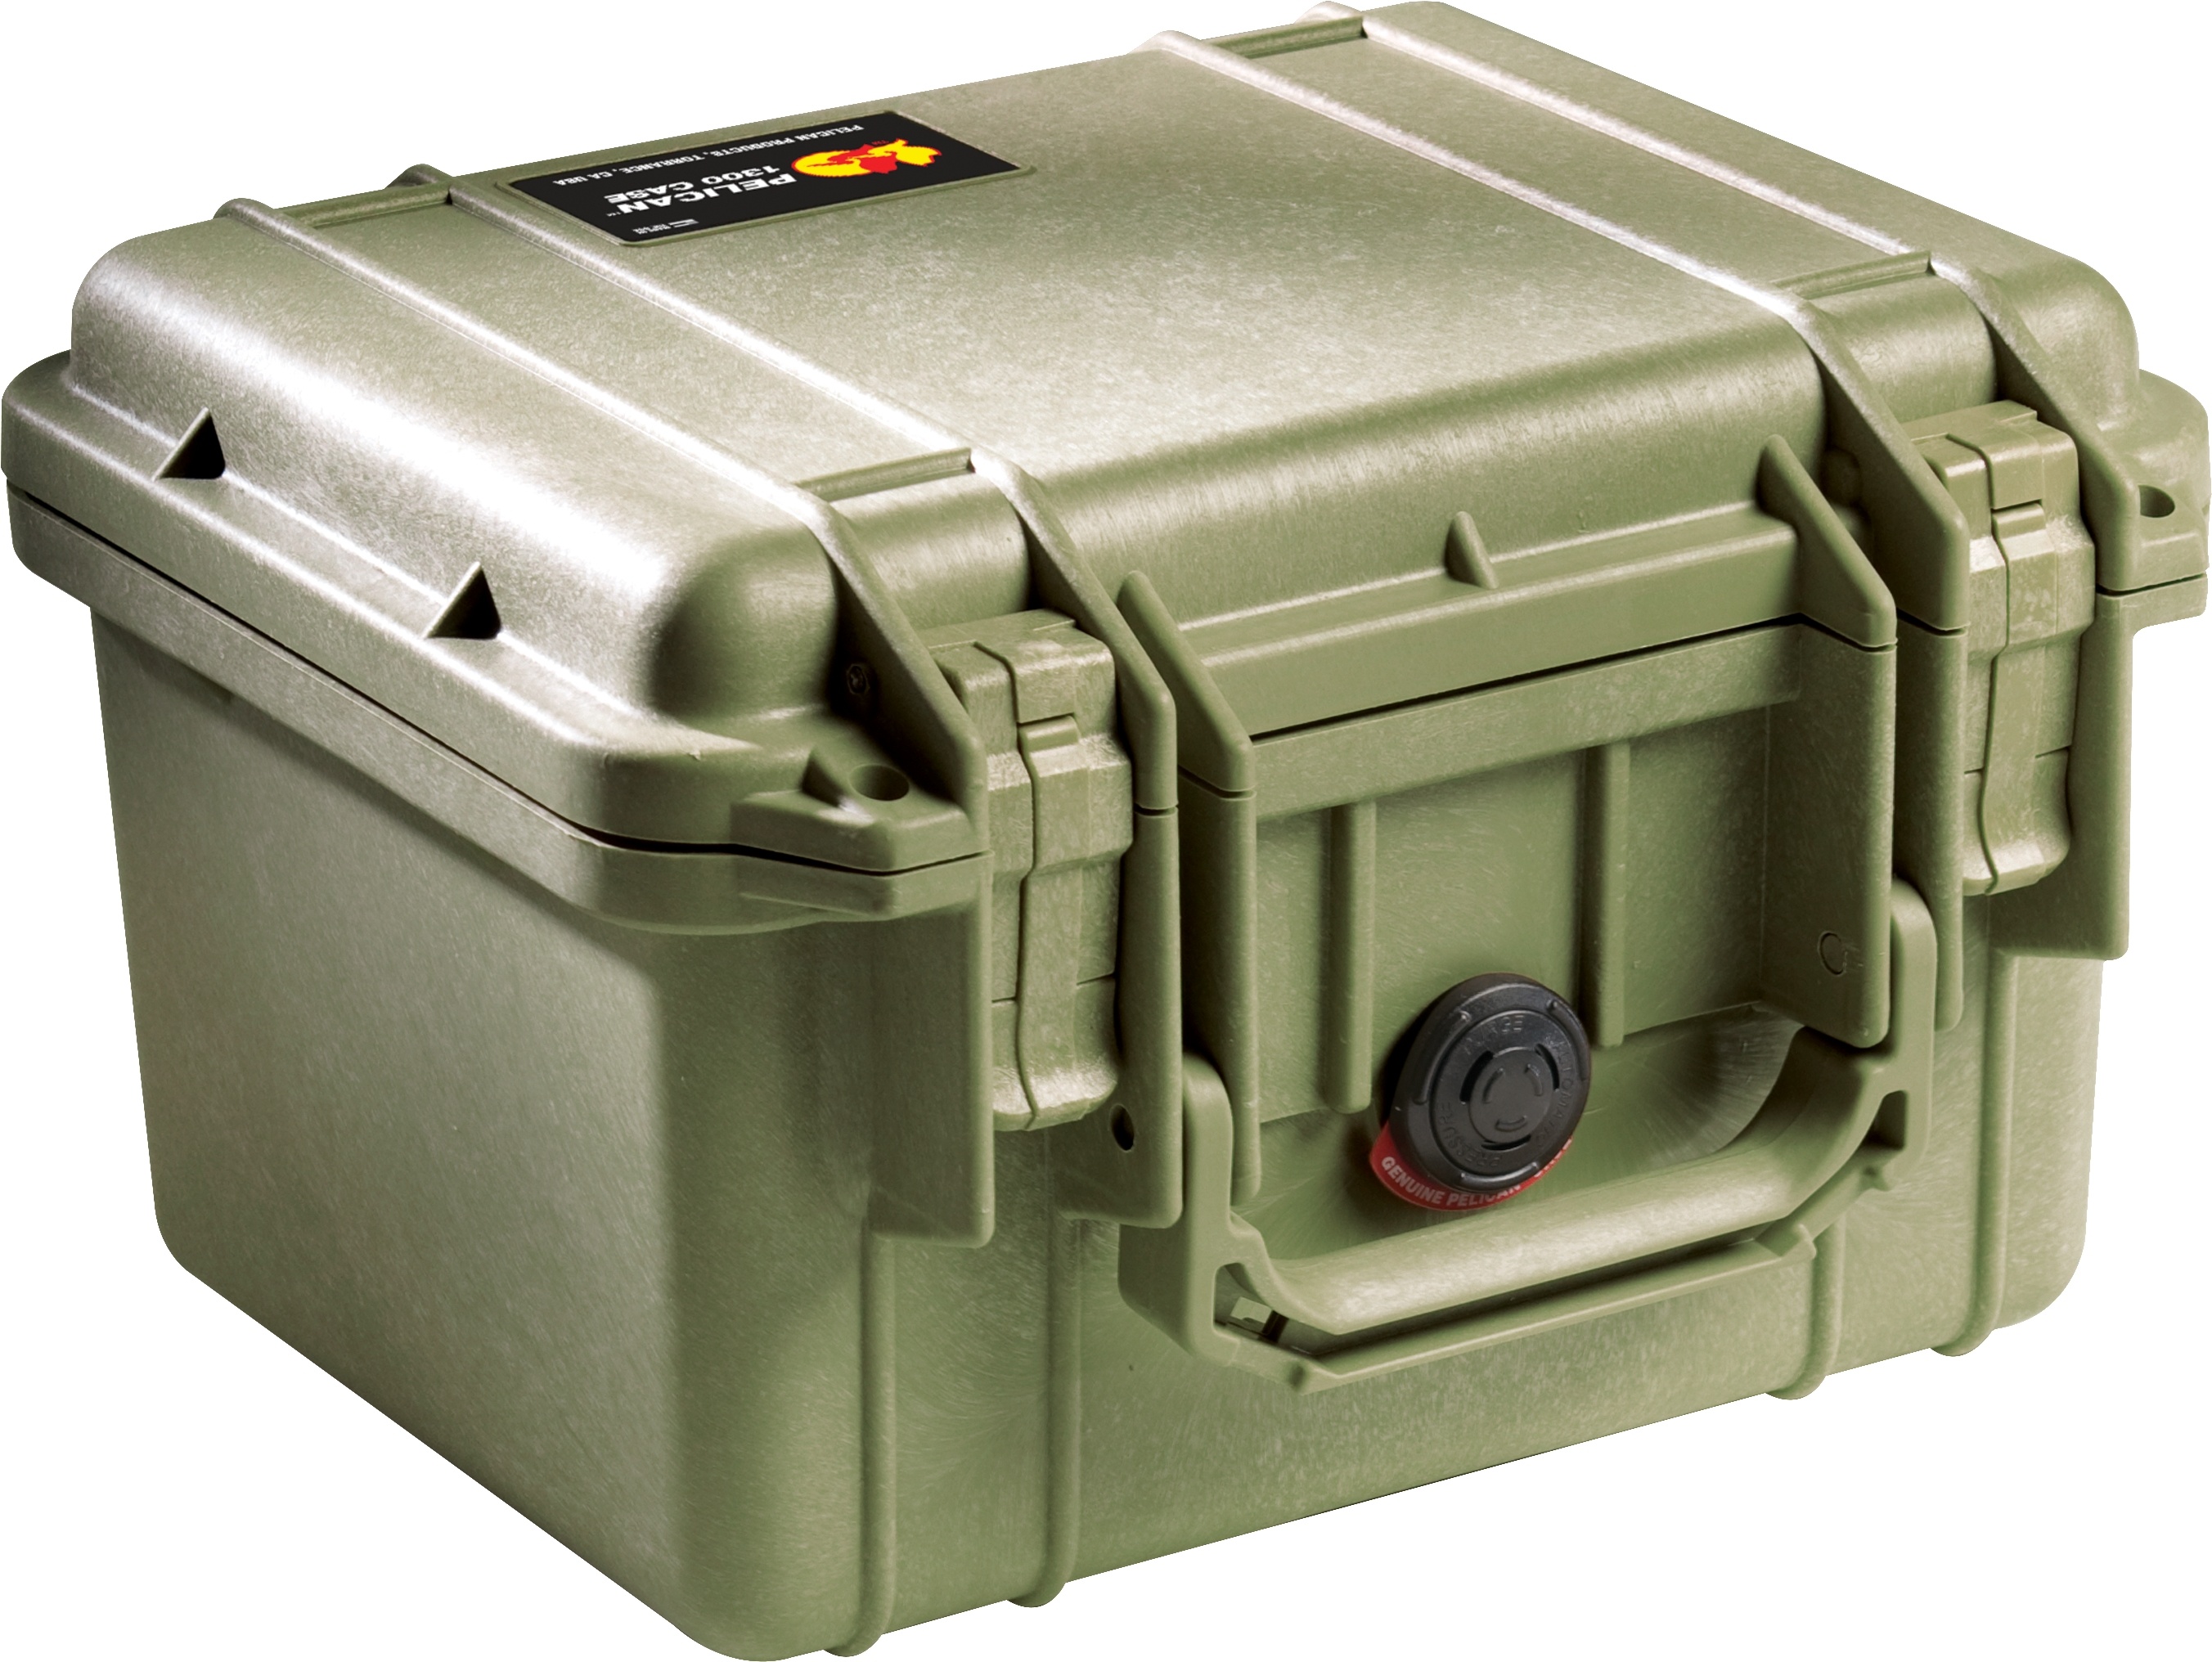 Pelican 1300 Case without Foam (Olive Drab Green)